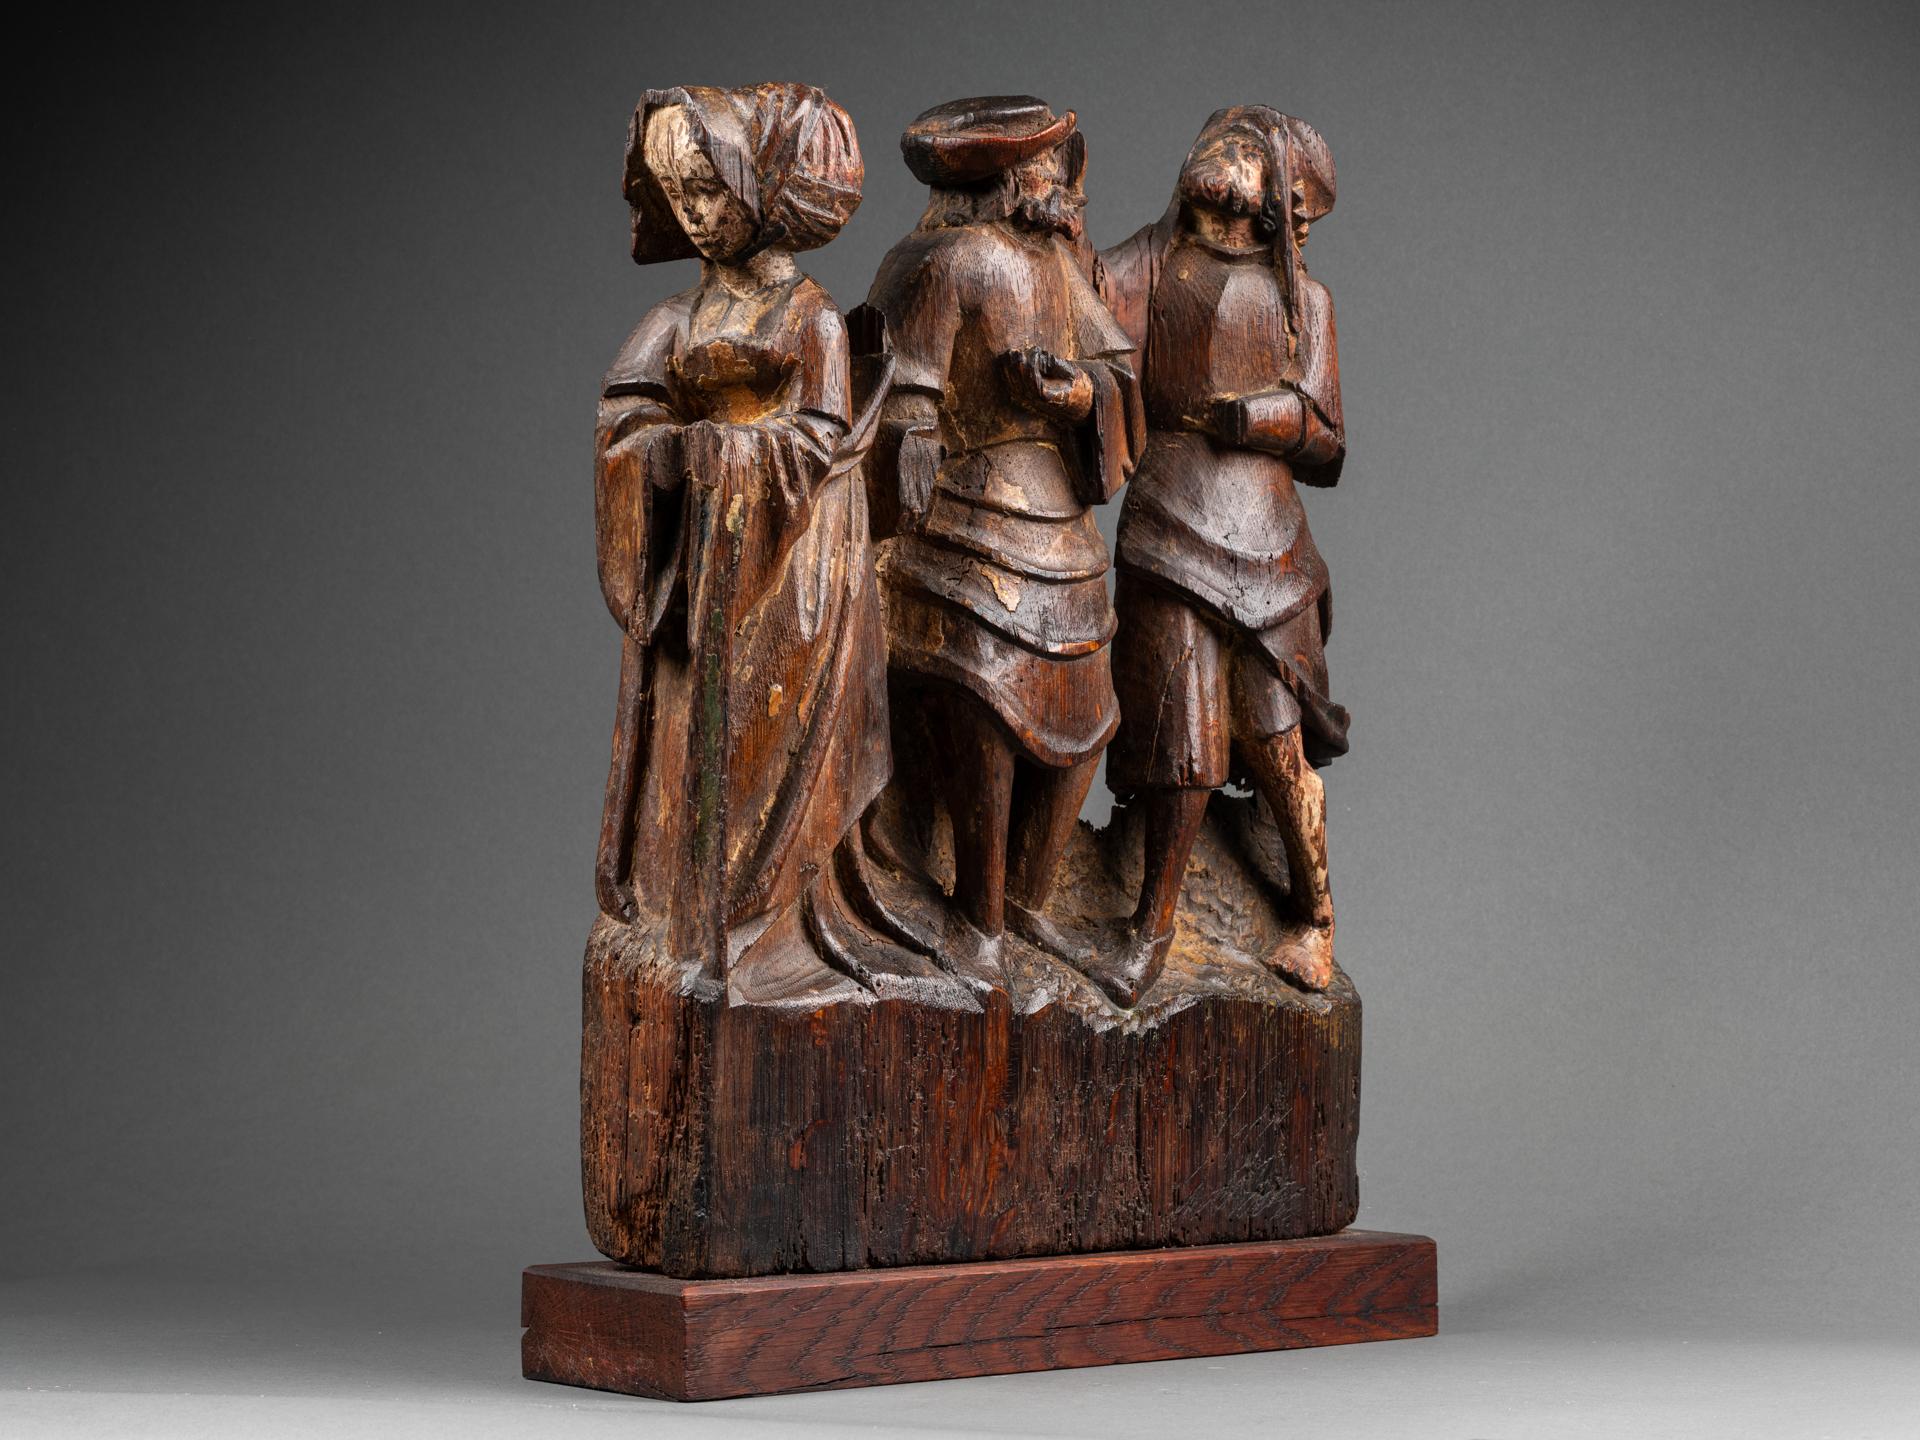 Group of altarpiece representing the life of a Saint, Saint Renualde? 
Engraved by the sign of Antwerp hand on the hat of the central character 
Carved oak, traces of polychromy 
First half of the 16th century 
31.5 x 39 x 6.5 cm

Under the rule of